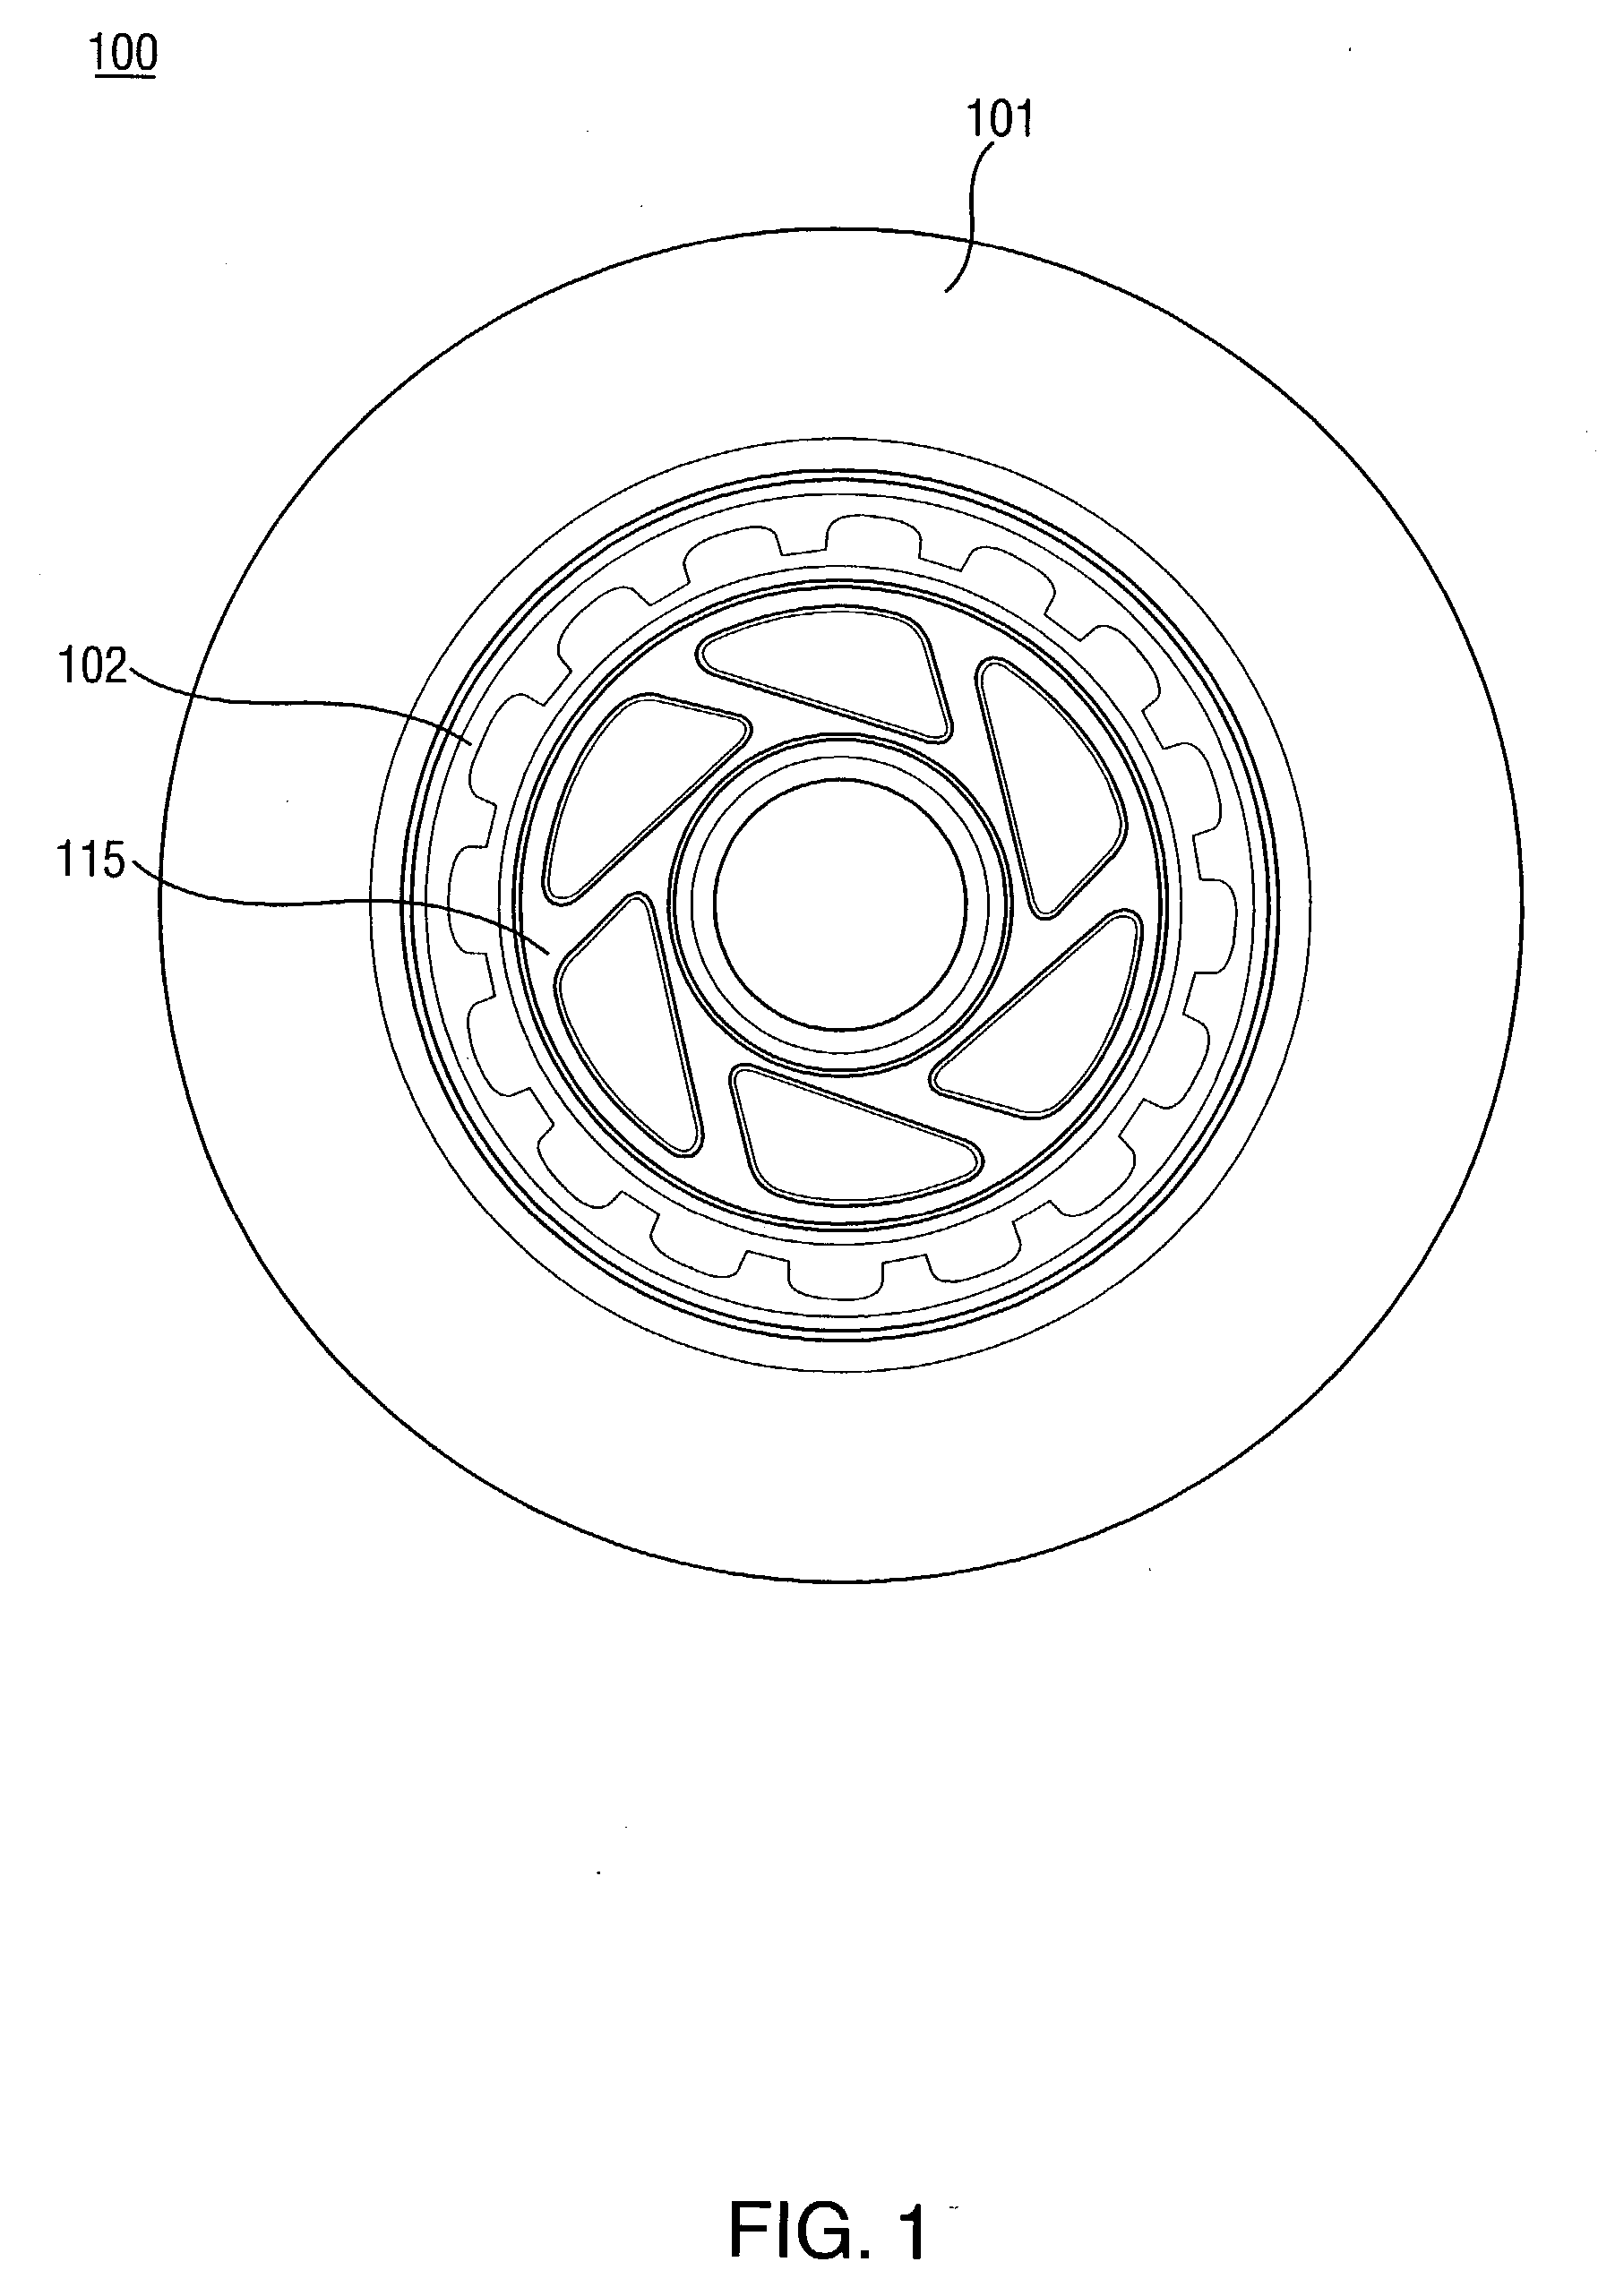 Wheel incorporating a flashing light feature